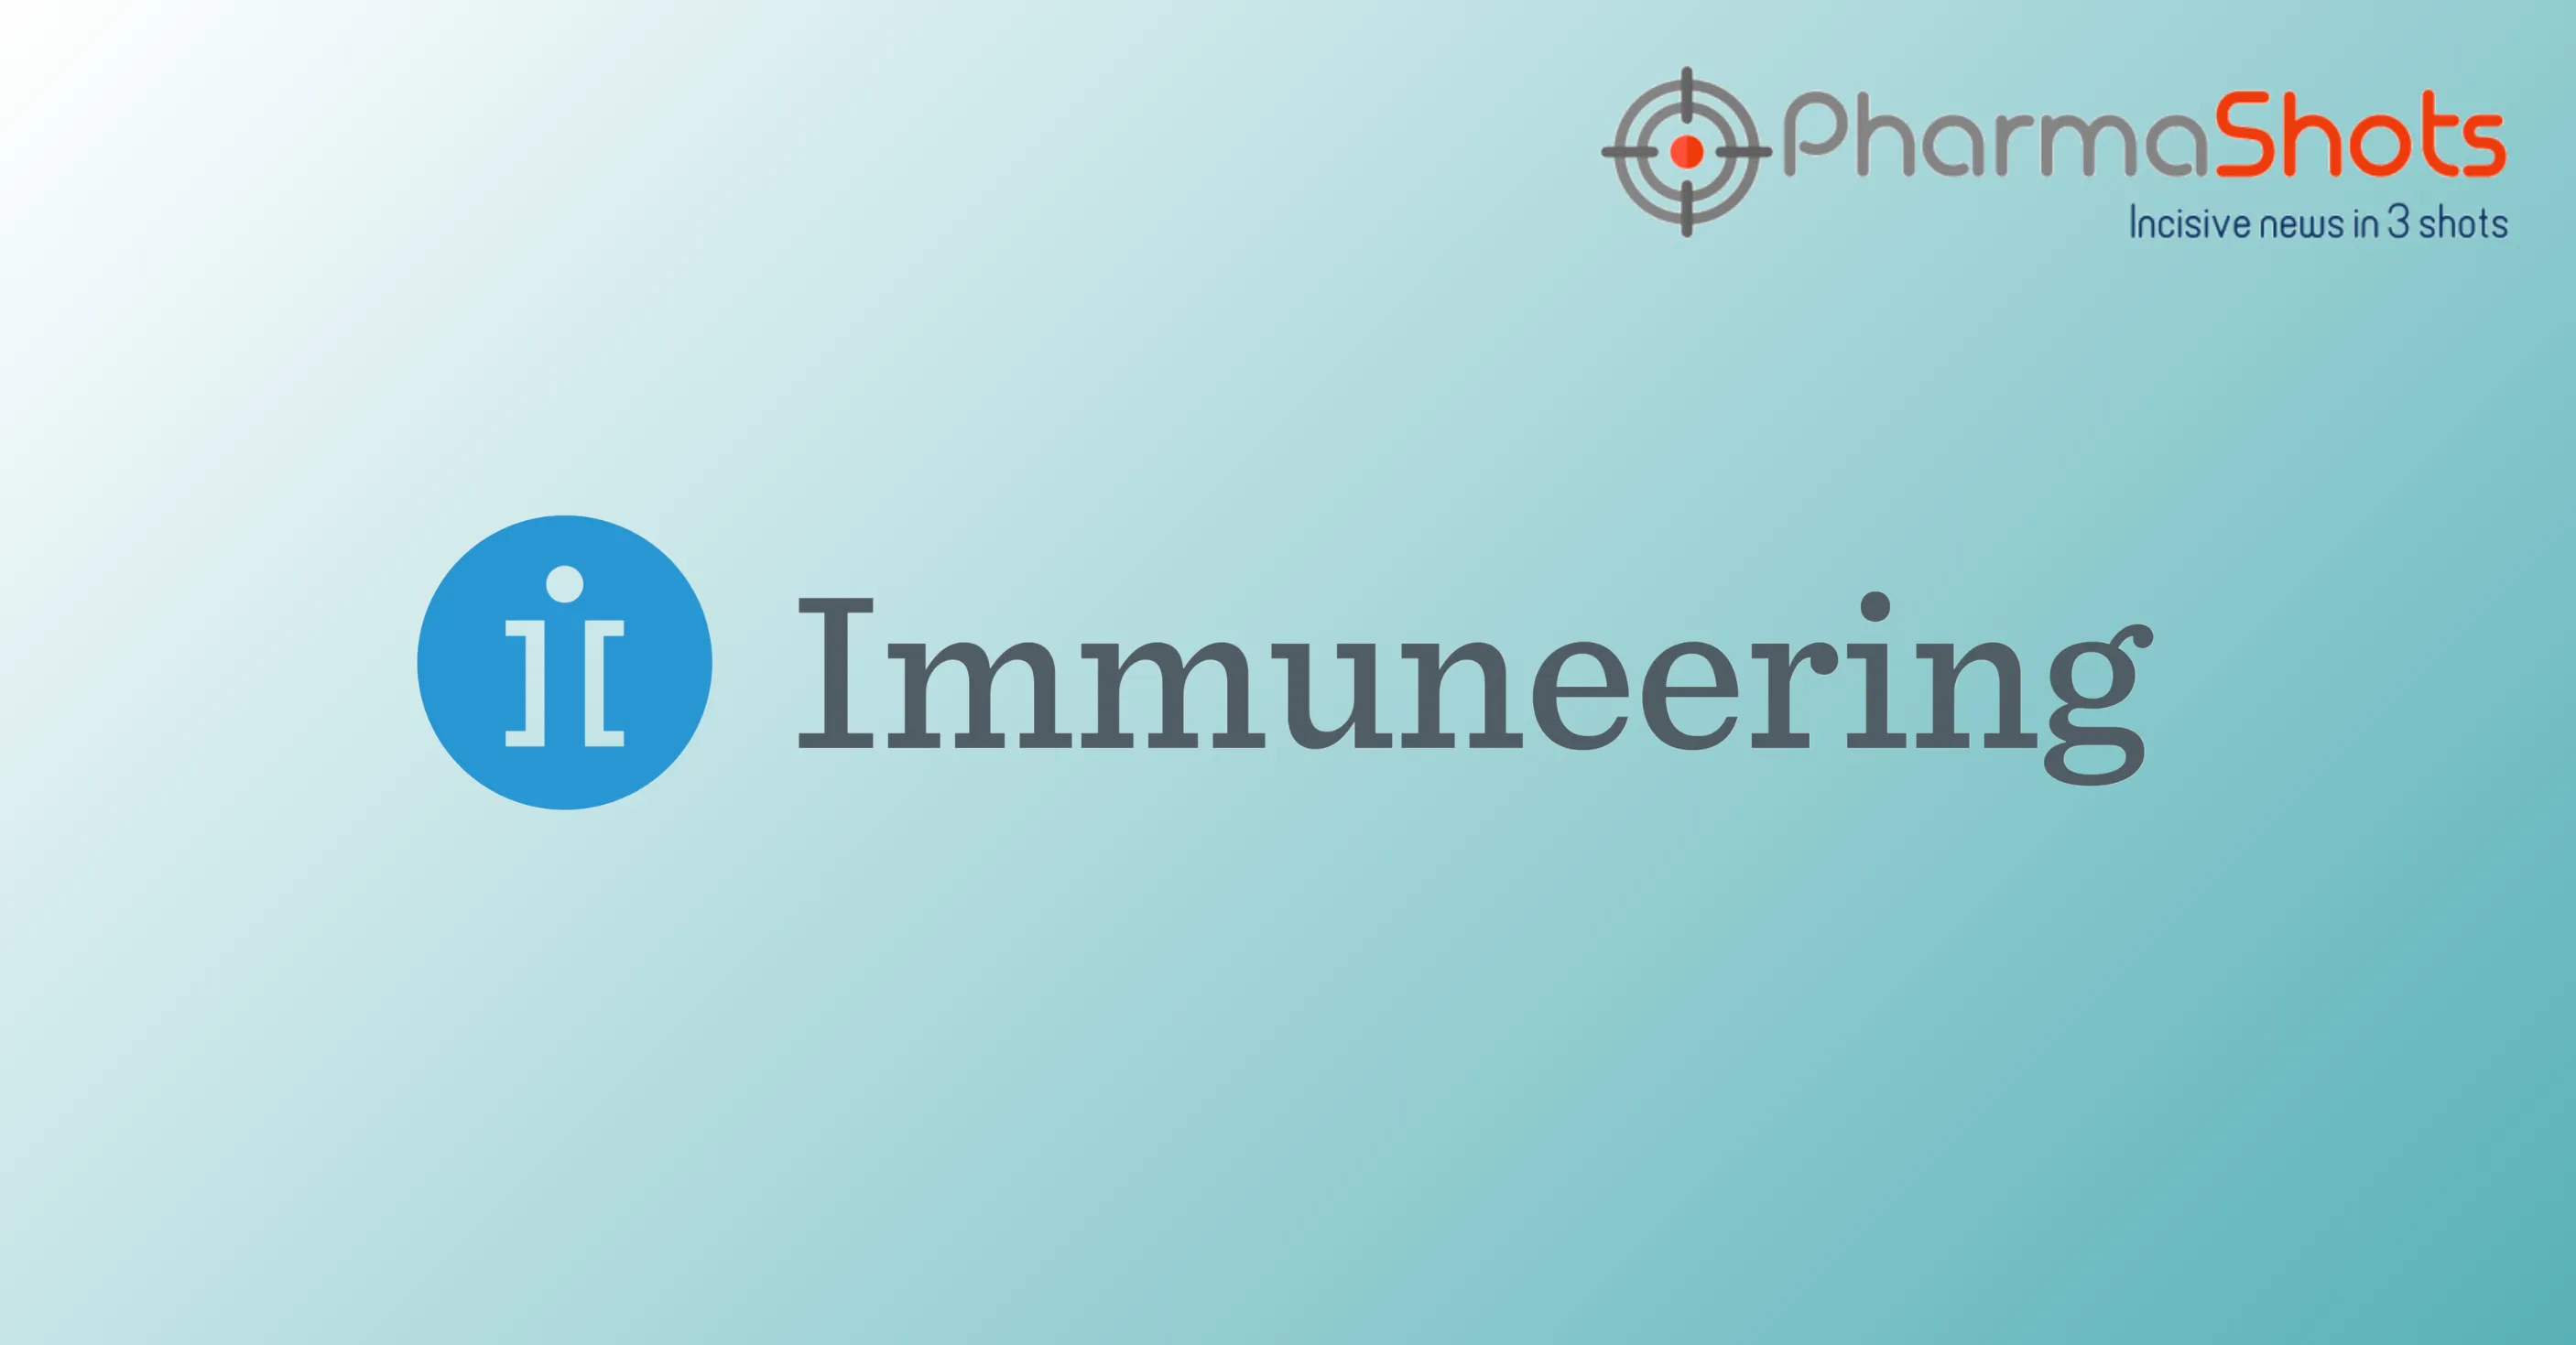 Immuneering Reports First Patient Dosing with IMM-6-415 in the P-I/IIa Study for Treating Advanced Solid Tumors